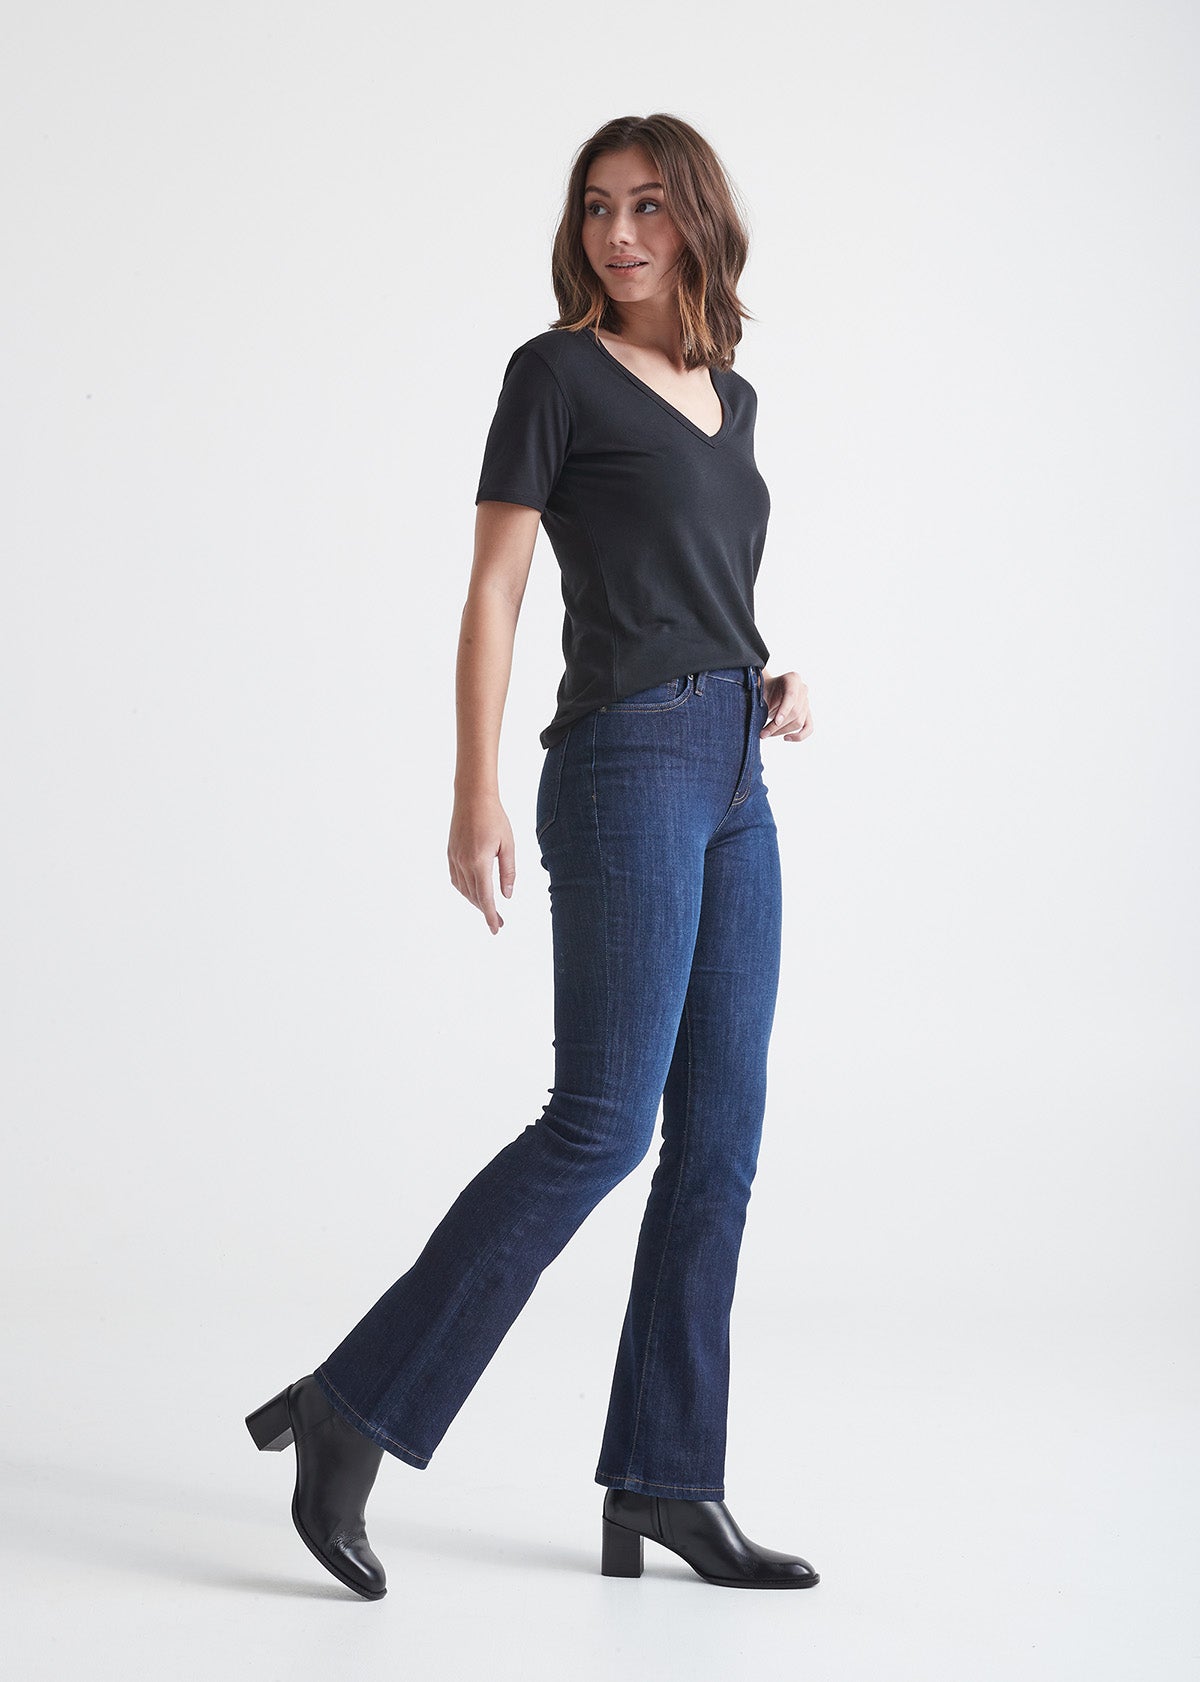 Fiorella Colombian Jeans with a High Waist Band Smooth Comfort